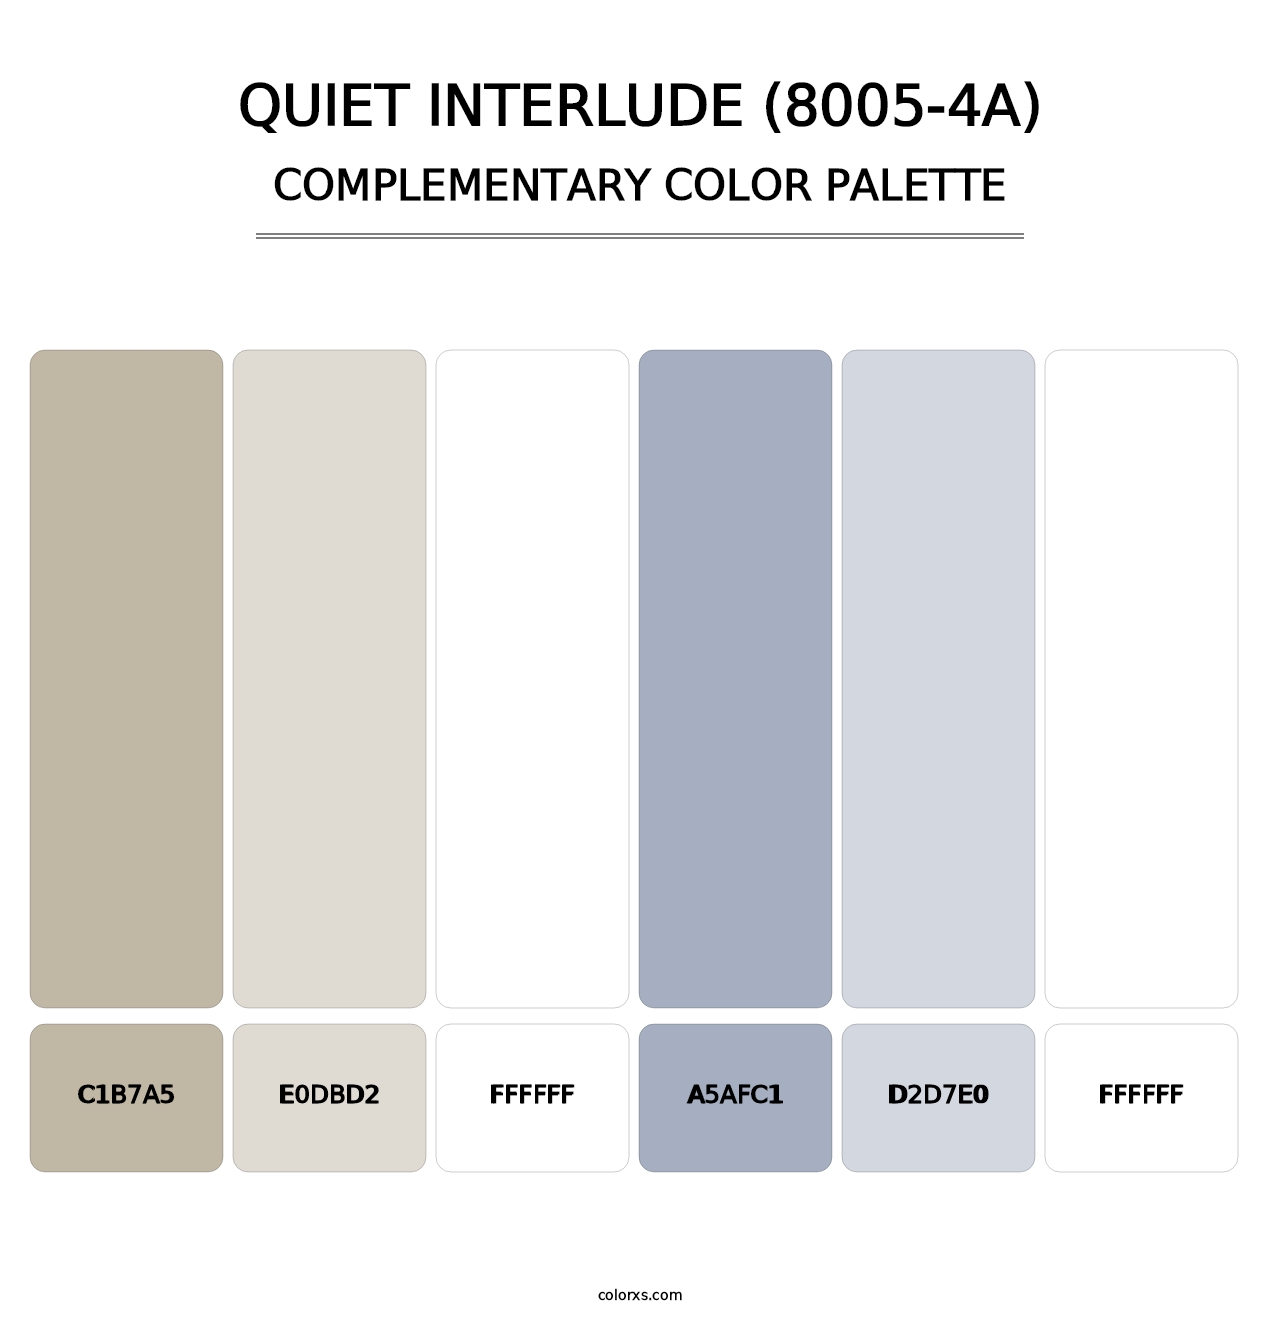 Quiet Interlude (8005-4A) - Complementary Color Palette